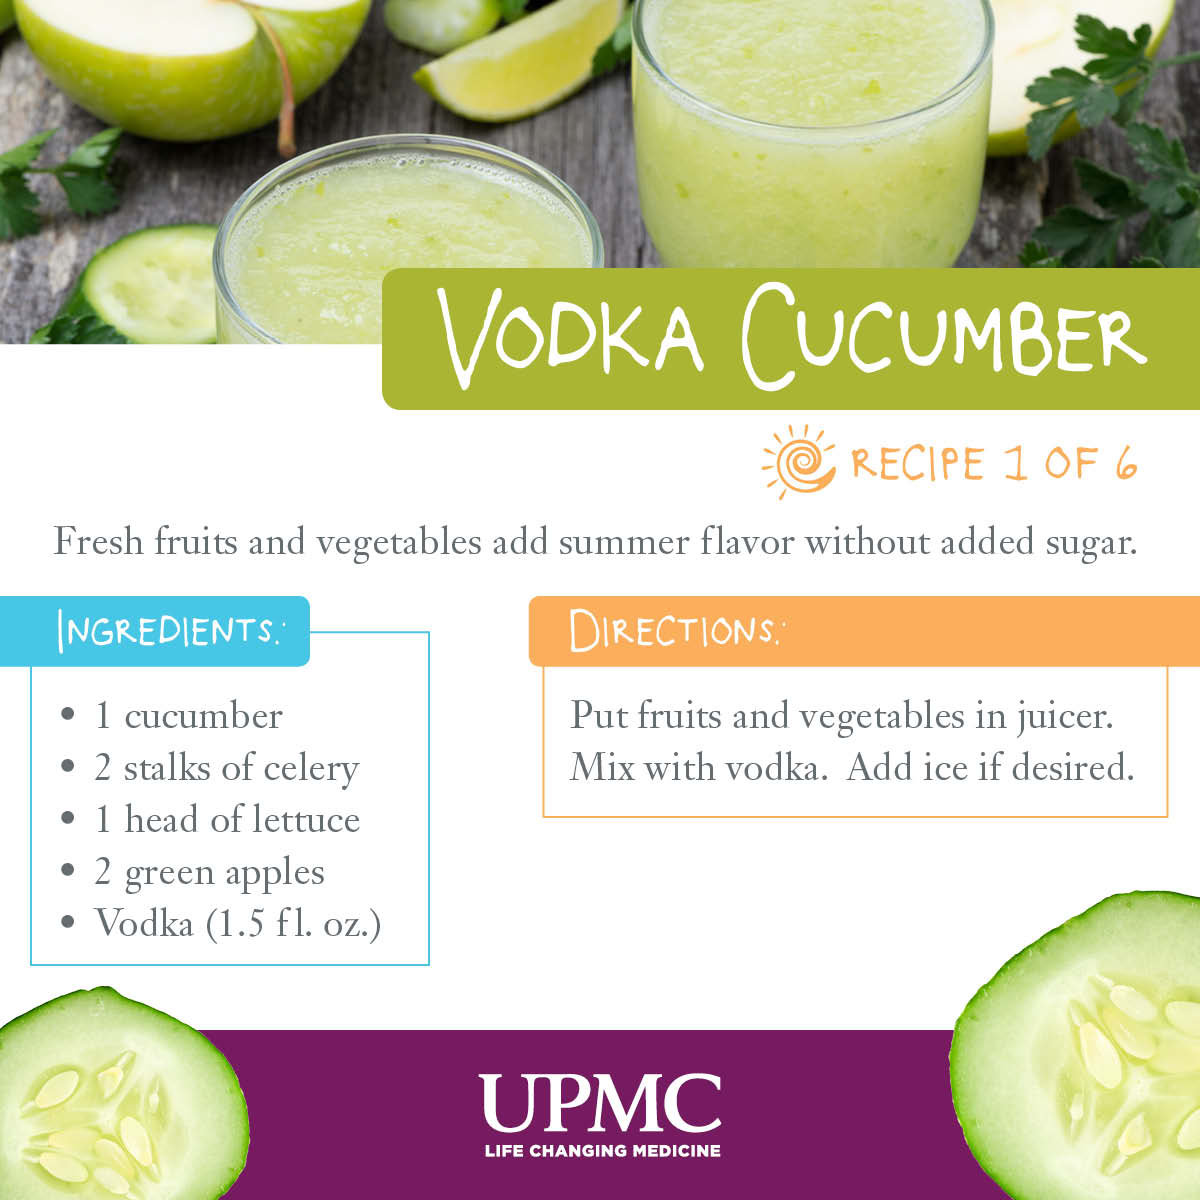 Try these healthier versions of summer drink recipes